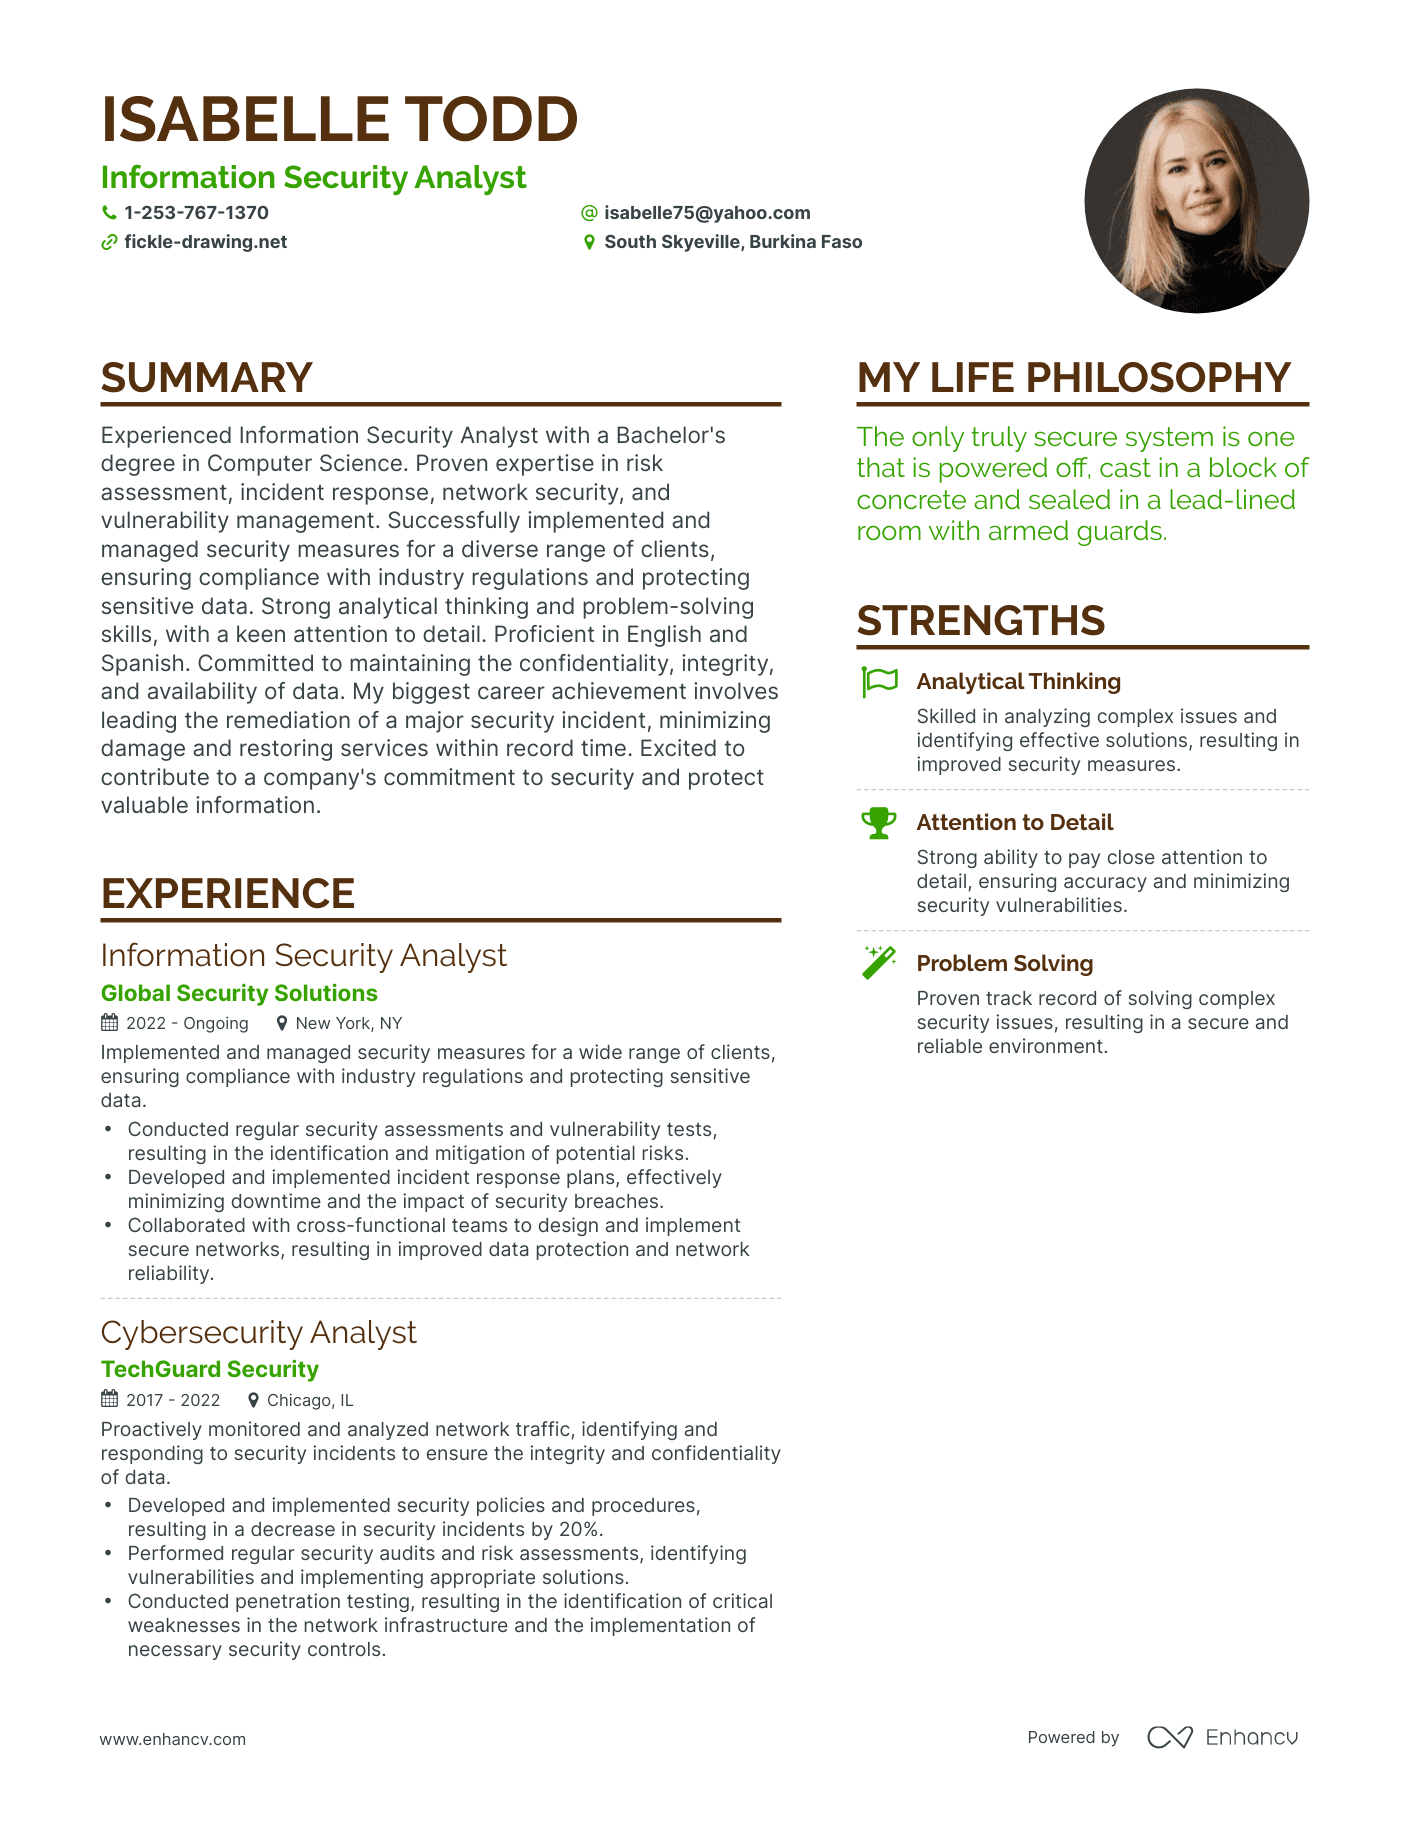 Information Security Analyst resume example